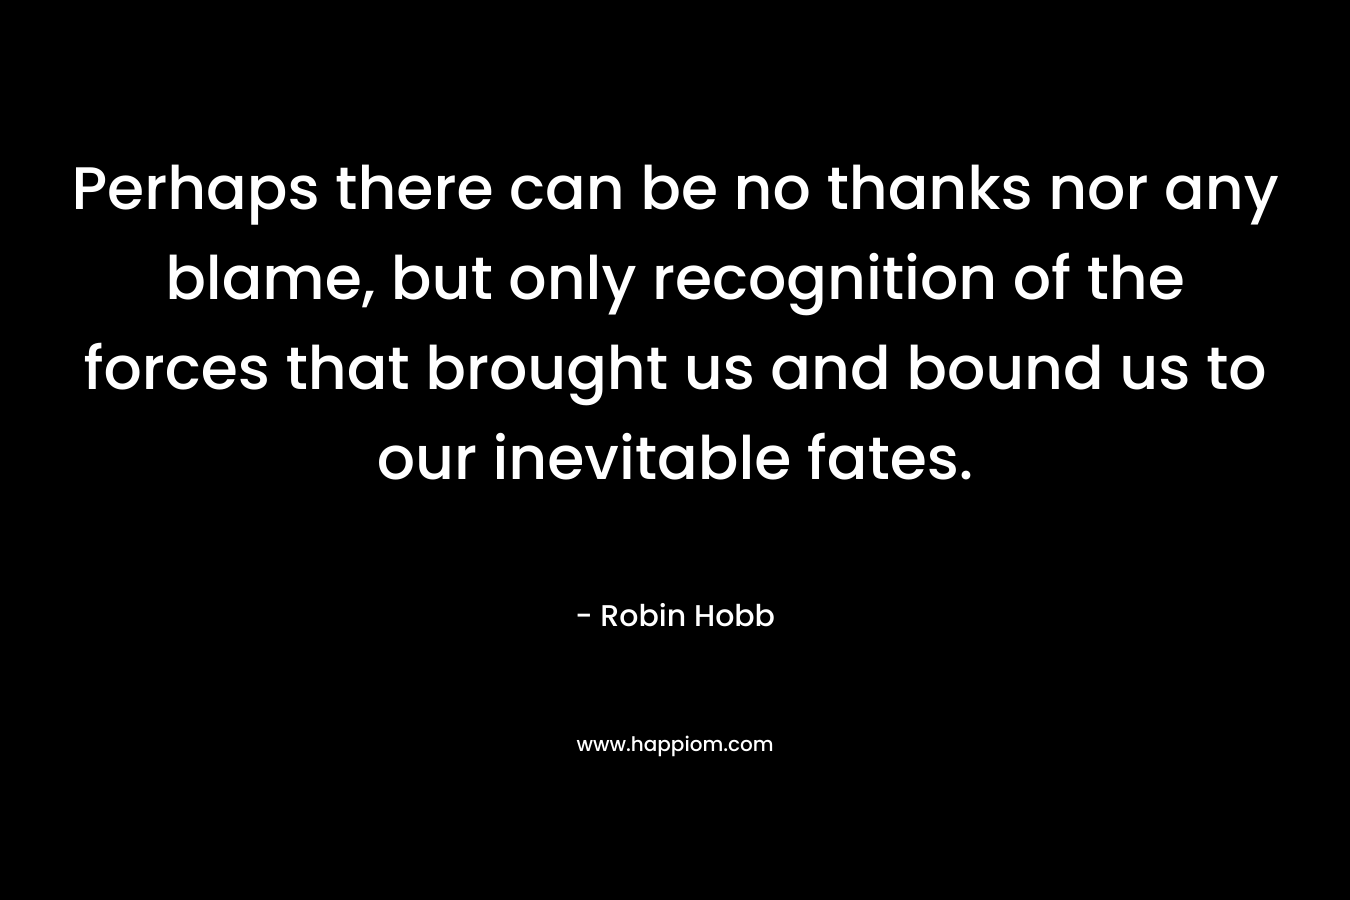 Perhaps there can be no thanks nor any blame, but only recognition of the forces that brought us and bound us to our inevitable fates.